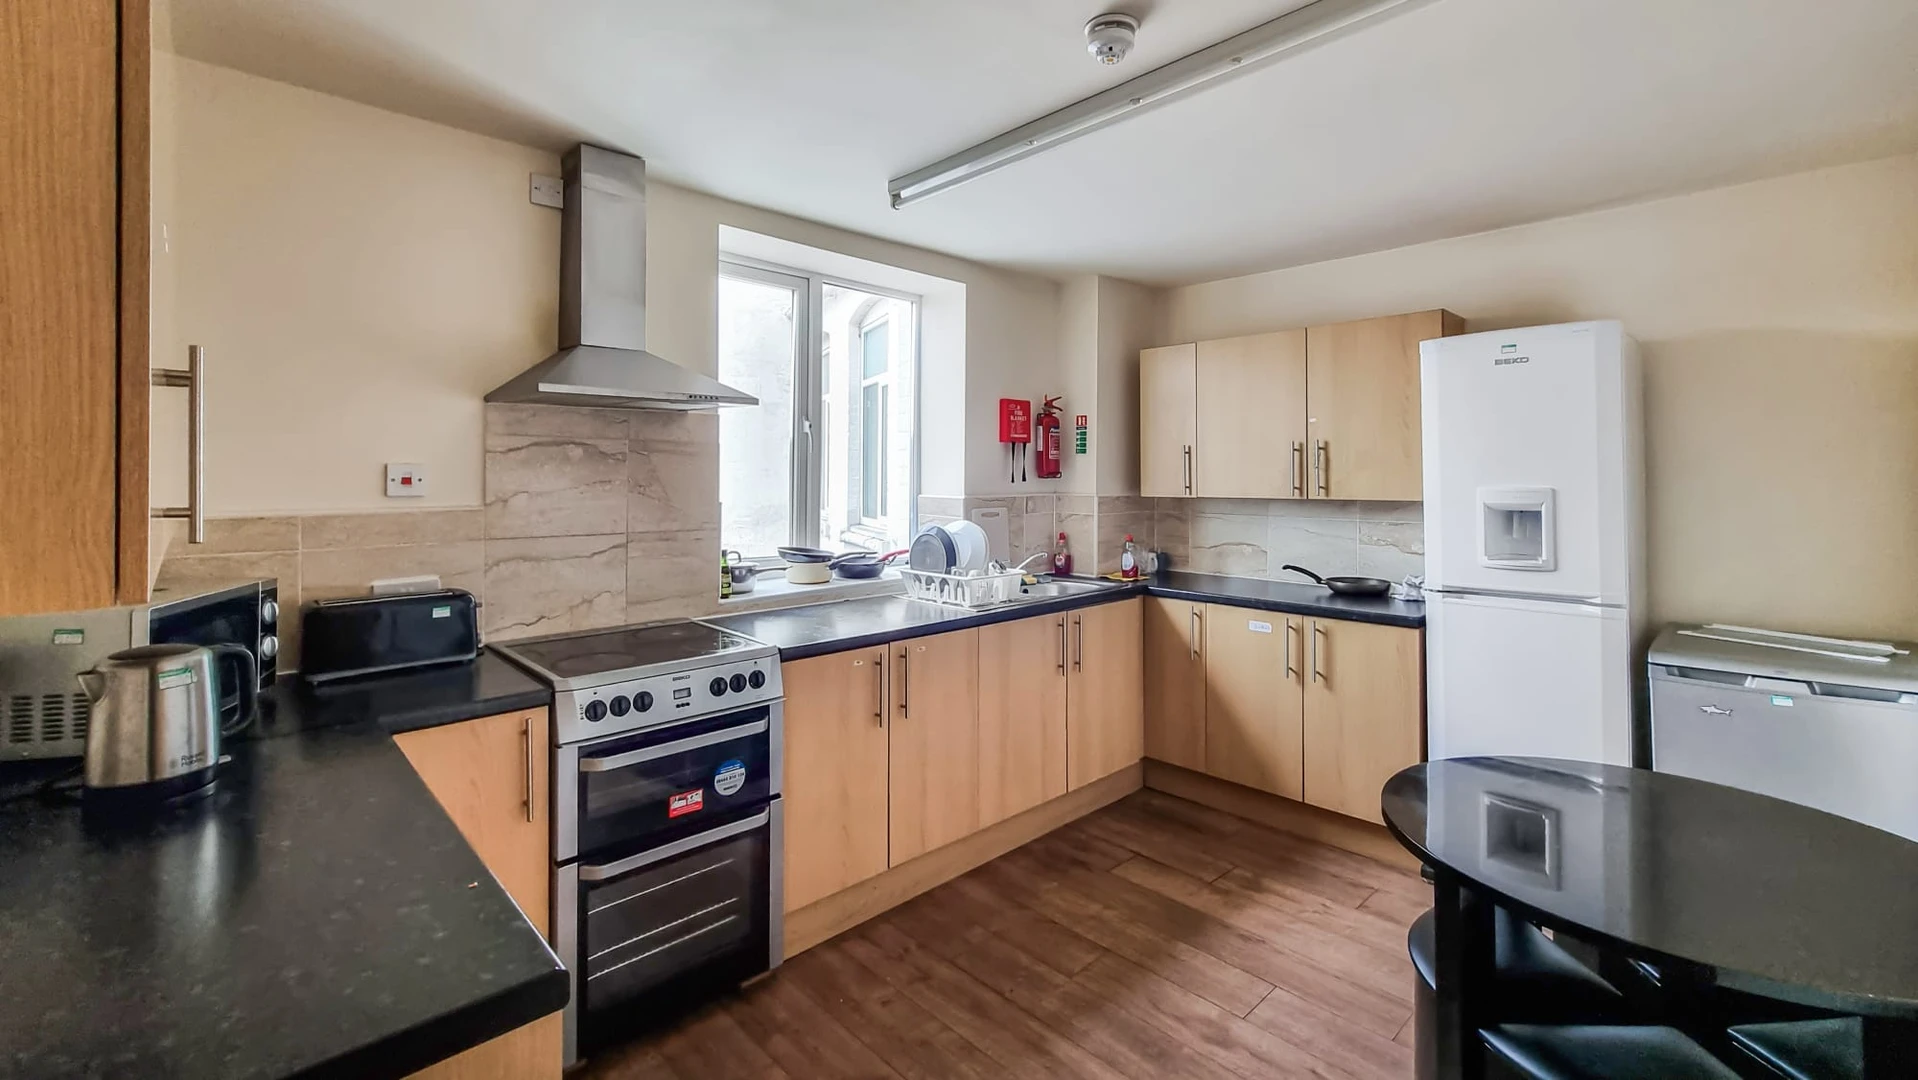 Room for rent in a shared flat in Stoke-on-trent